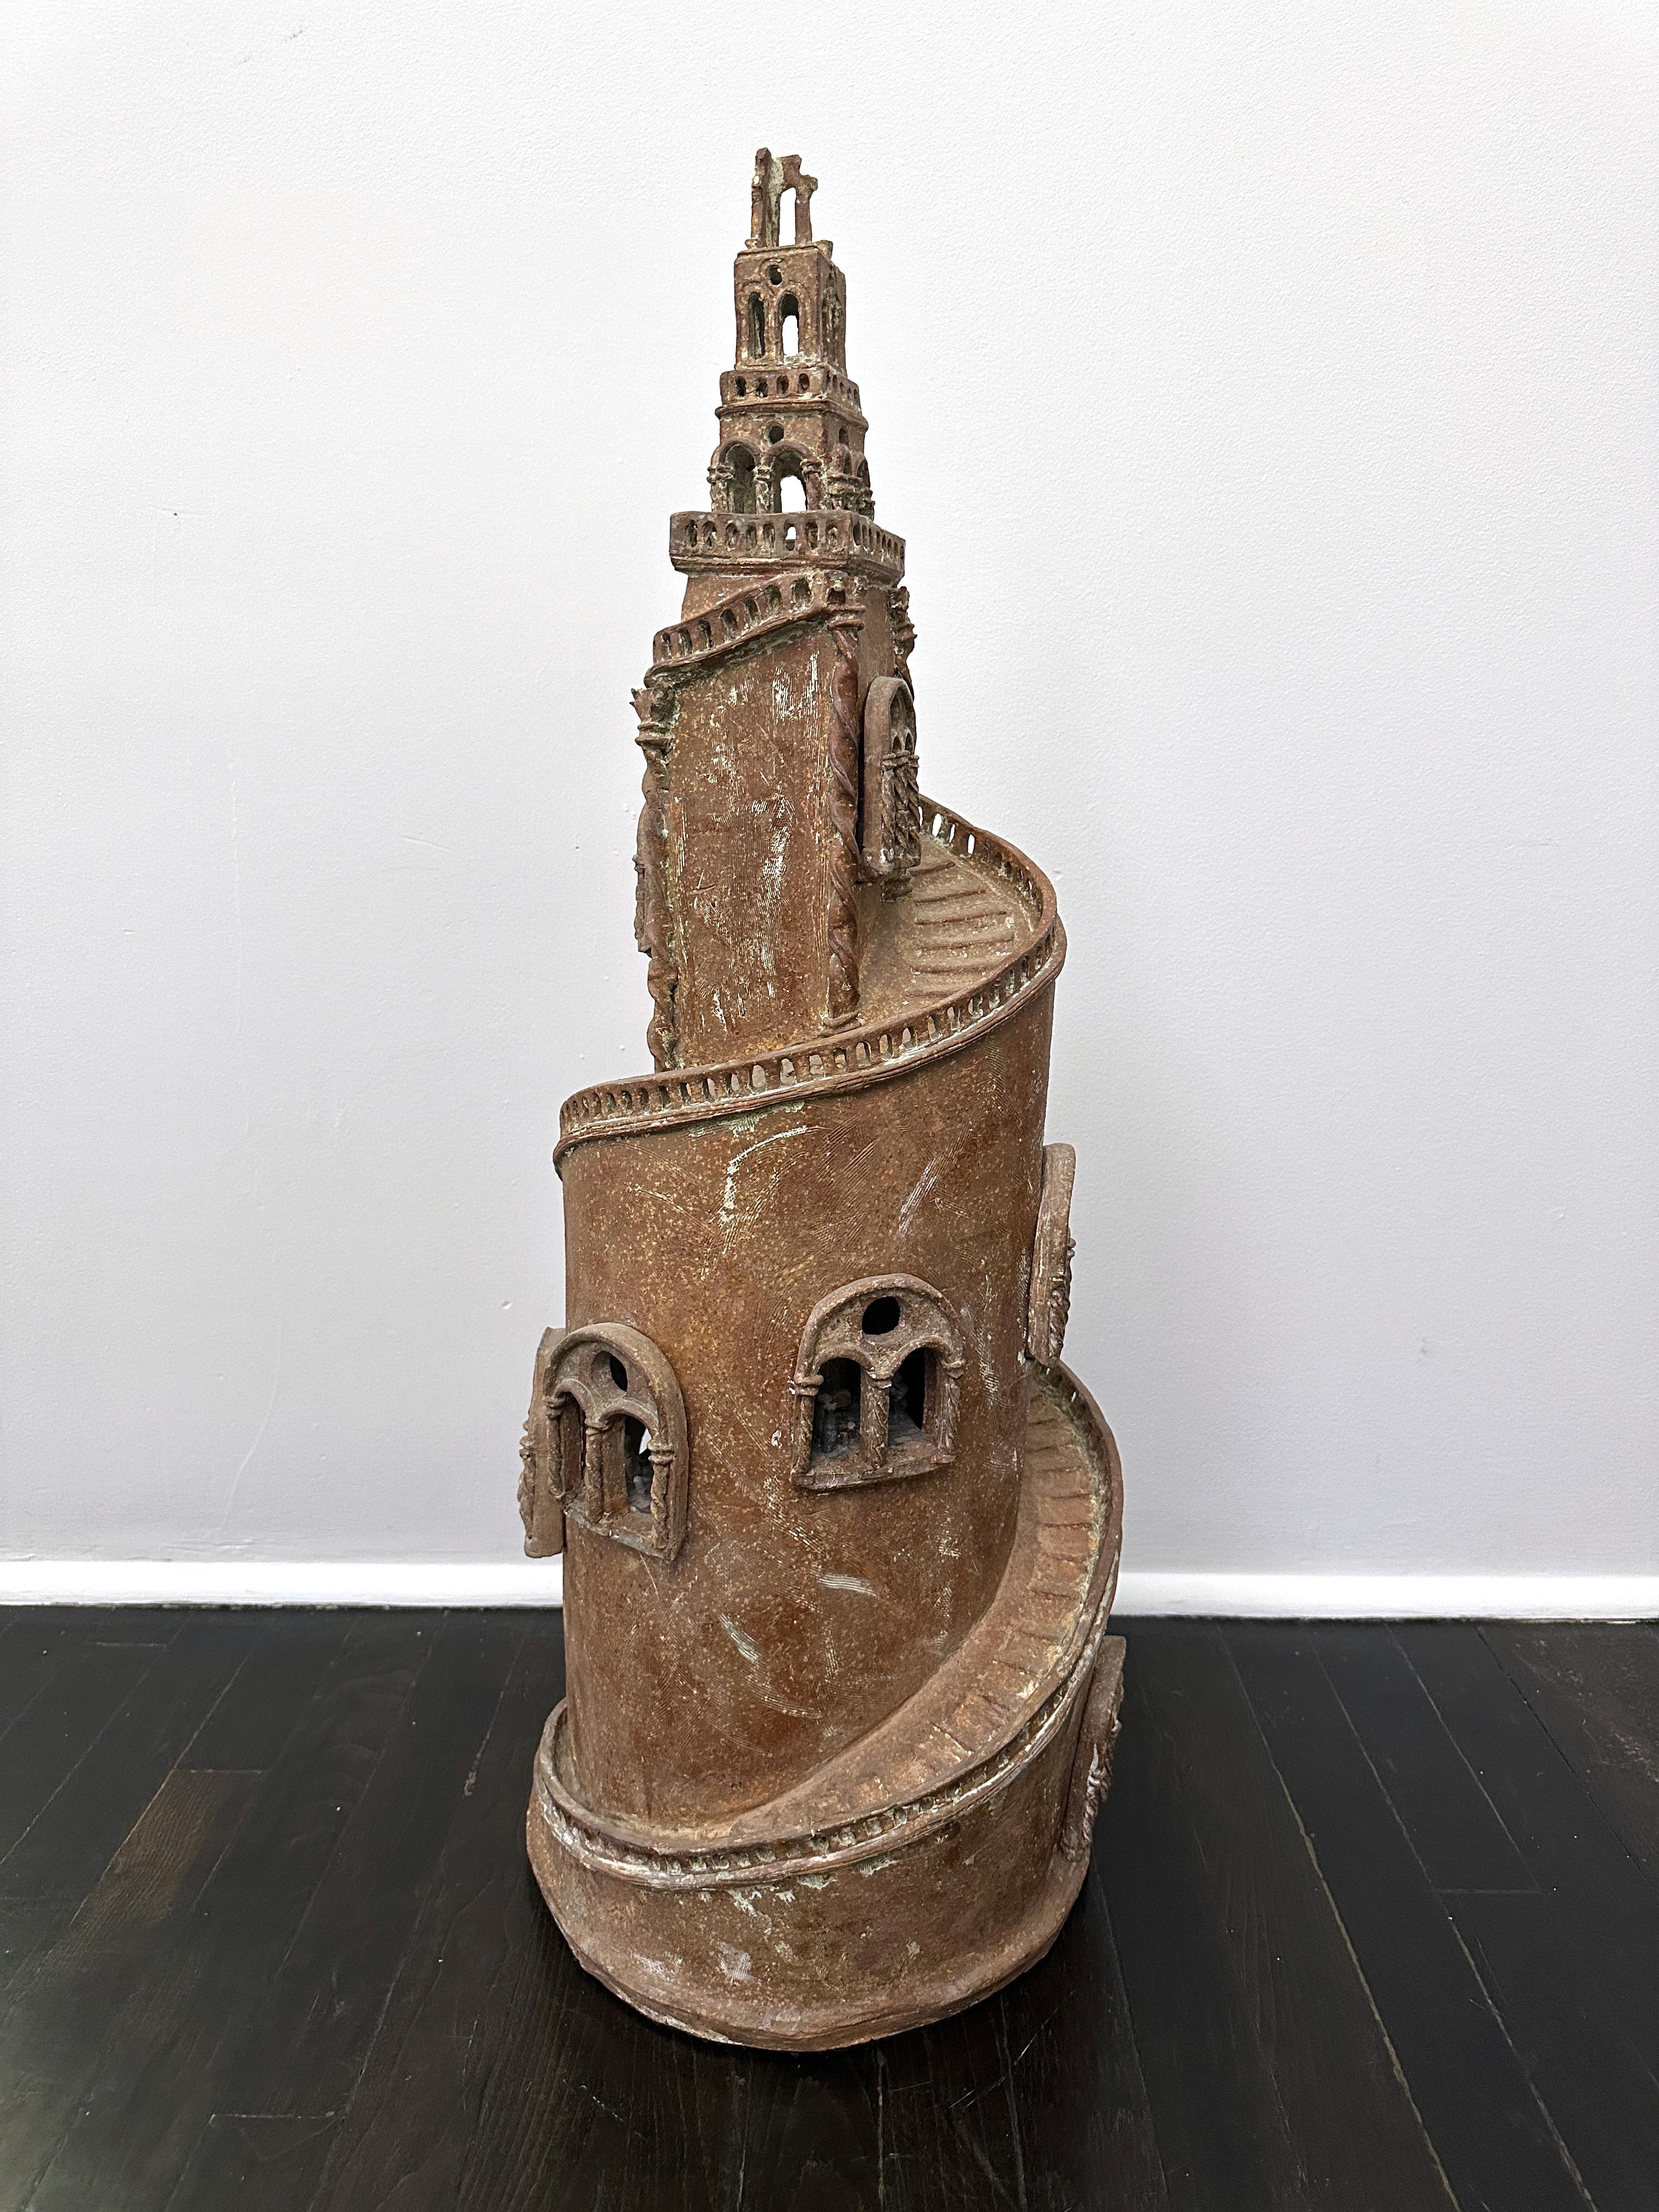 20th century carved clay sculpture of the Tower of Babel. Hand-built coiled tower with window openings revealing figures within. Unique and very detailed sculpture. 

Property from esteemed interior designer Juan Montoya. Juan Montoya is one of the